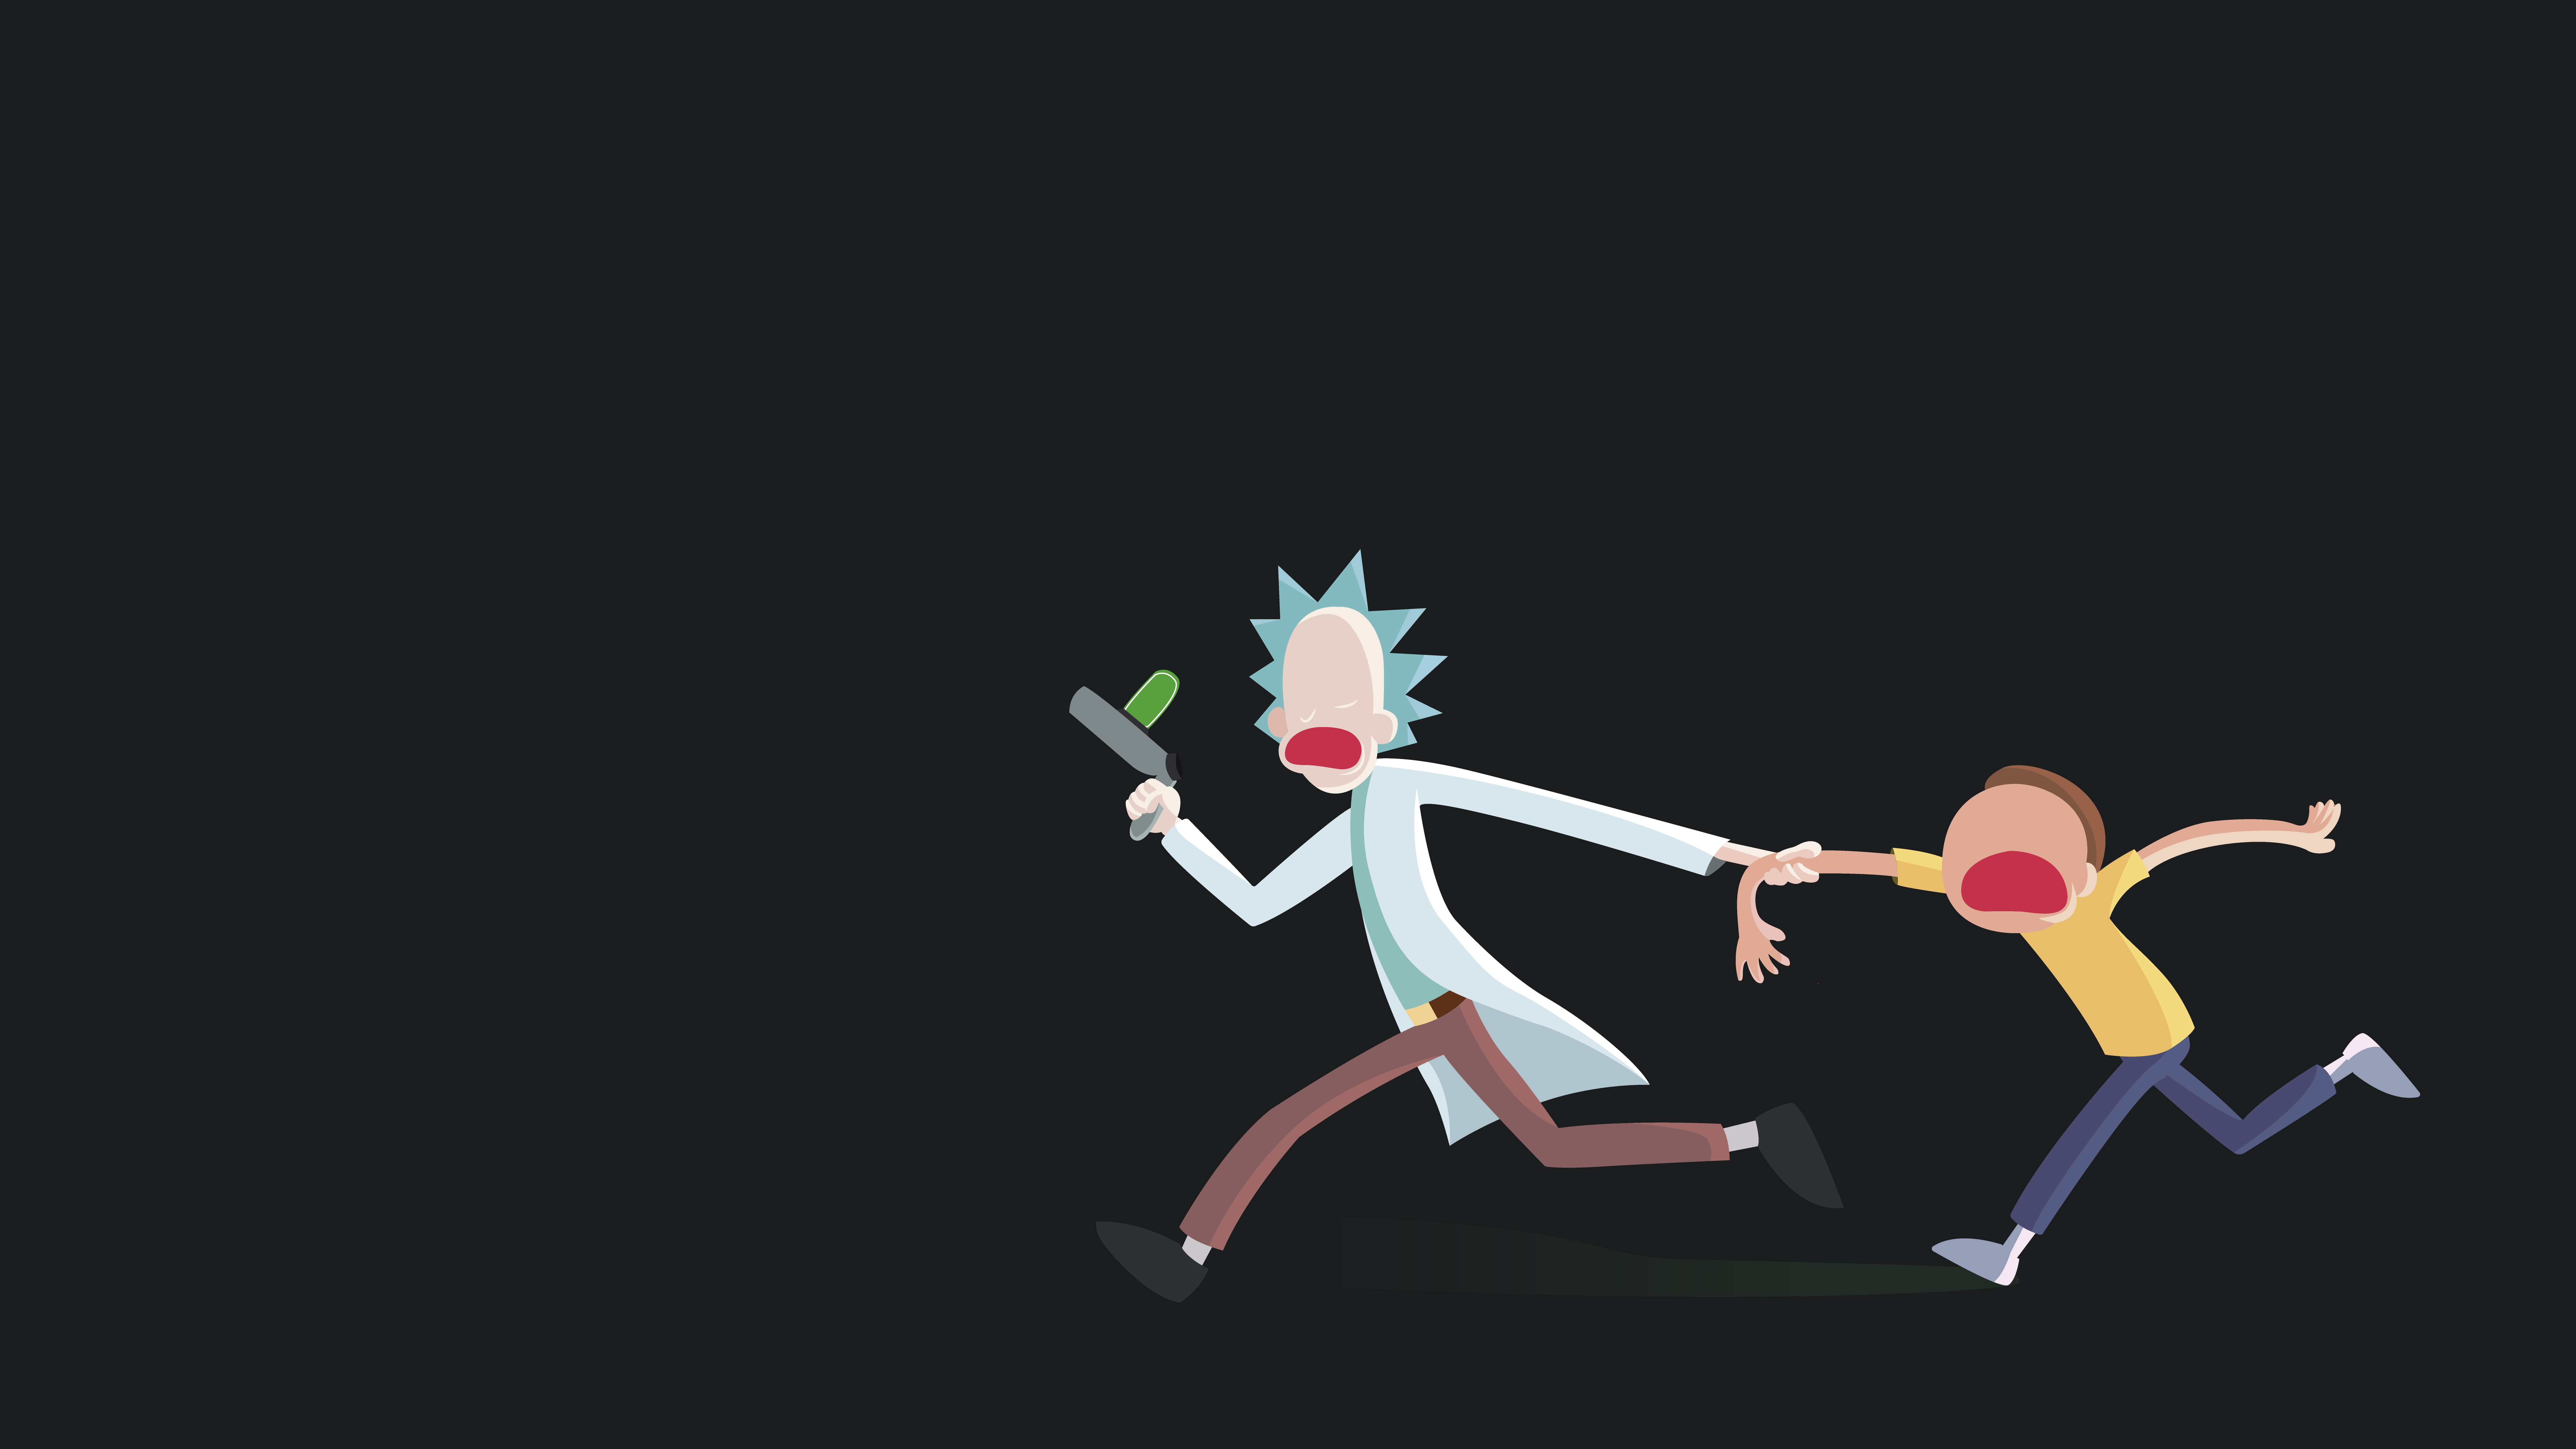 Rick And Morty Minimalist Wallpapers Wallpaper Cave